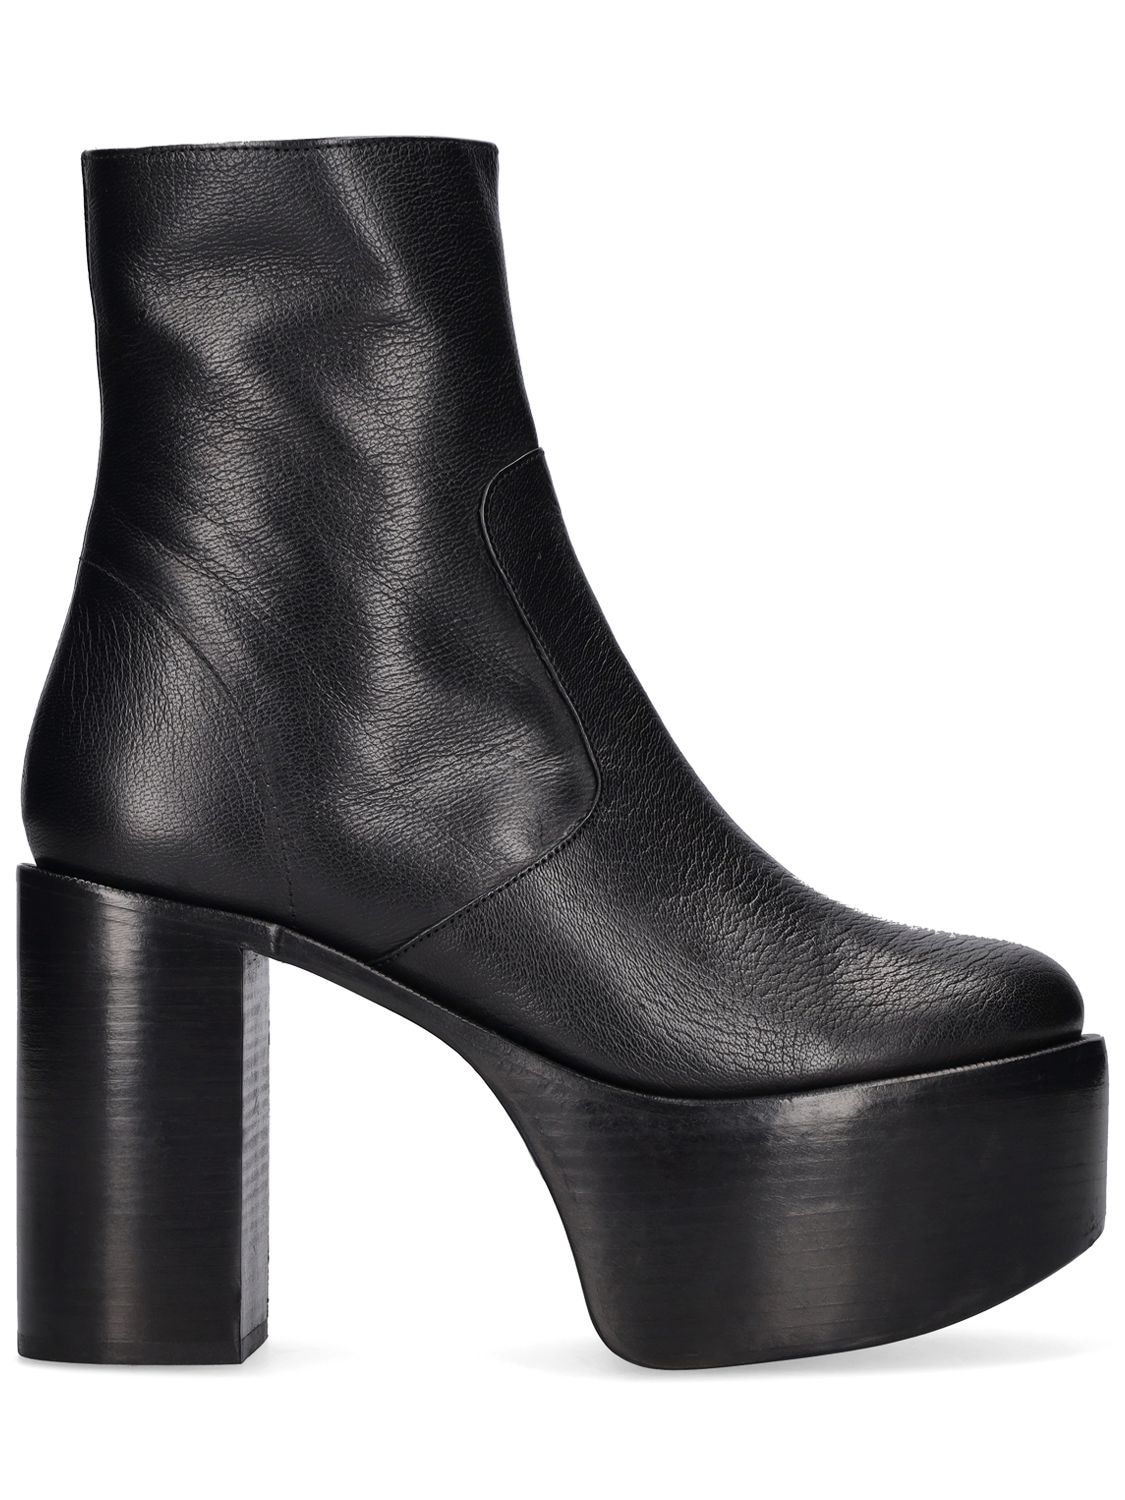 SIMON MILLER 110MM HIGH RAID LEATHER ANKLE BOOTS